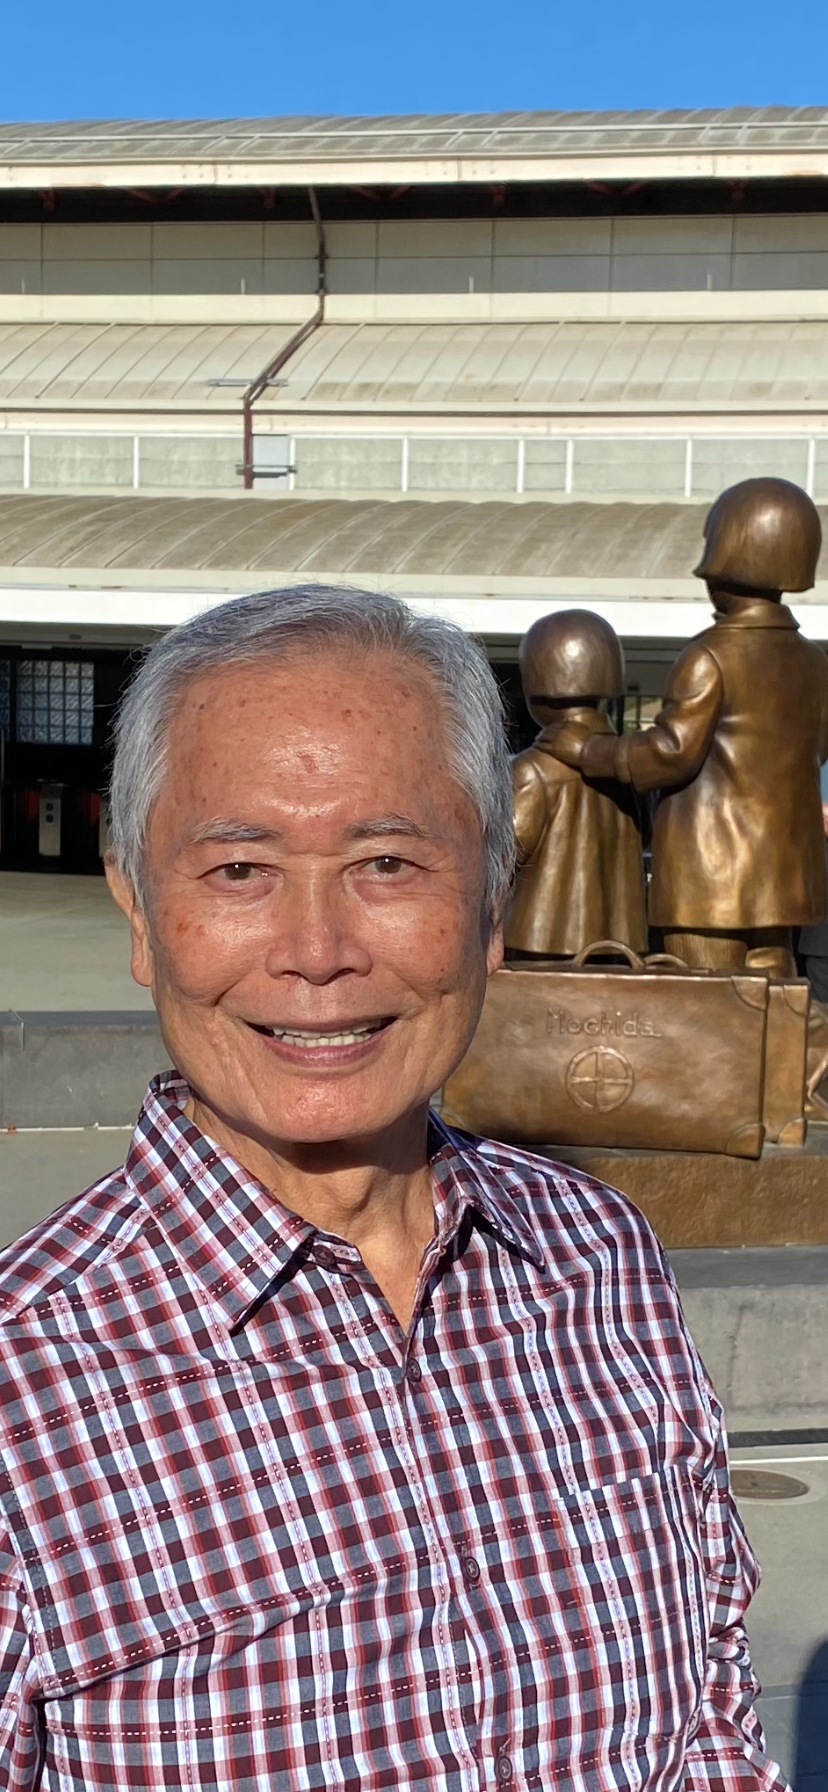 George Takei with Mochida sisters statue in background